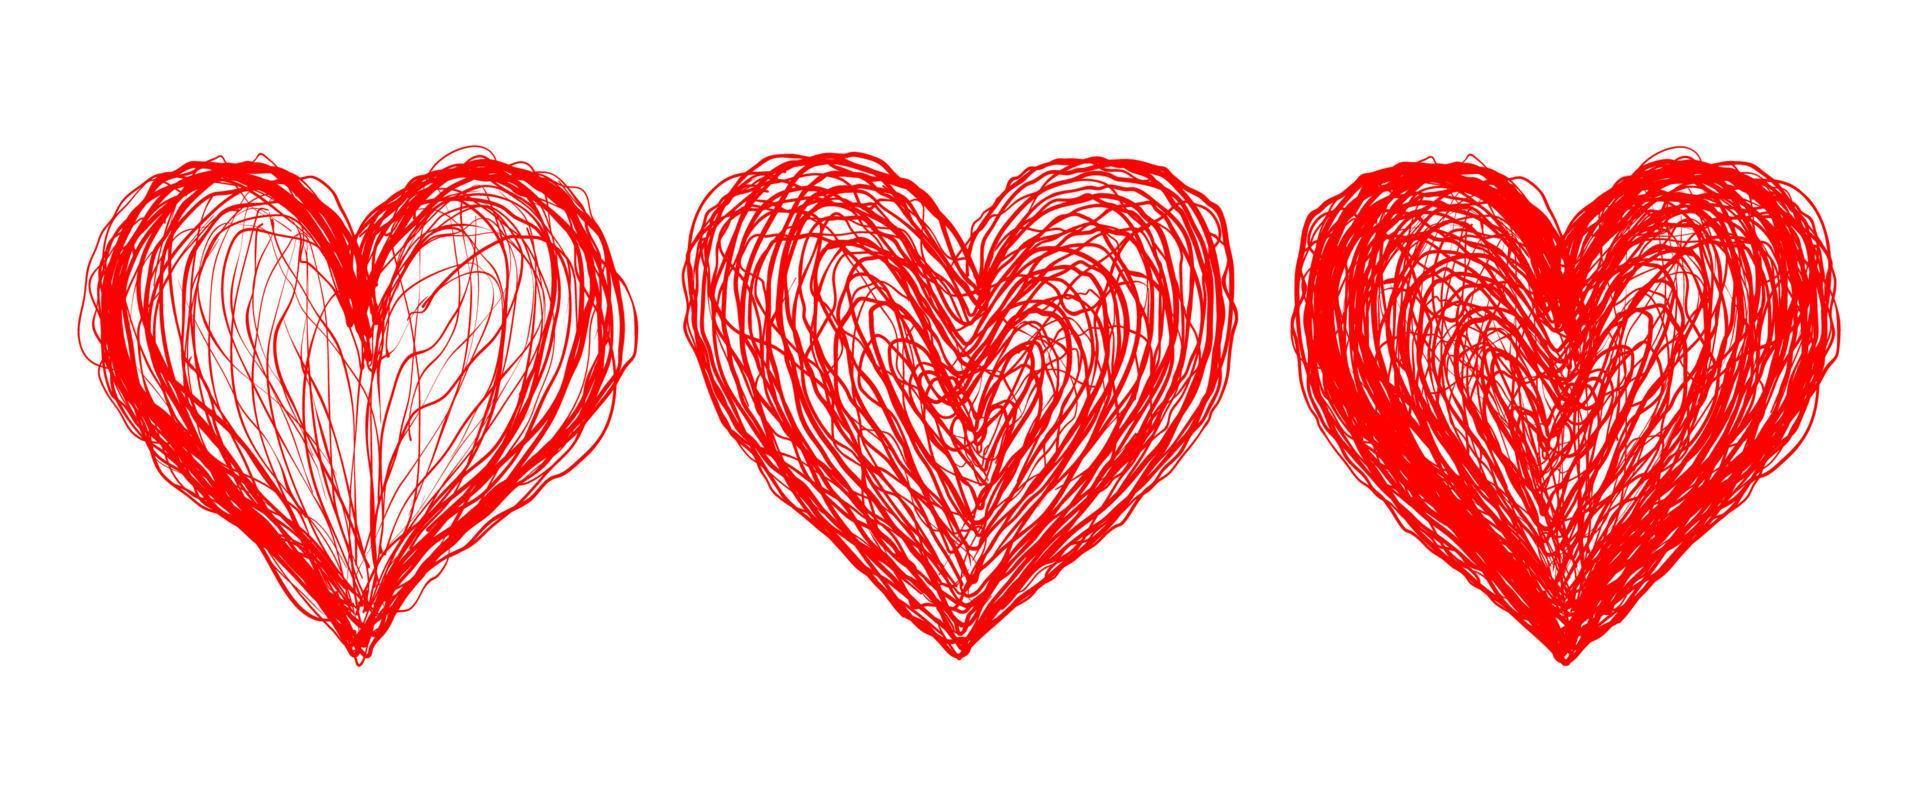 Vector illustration of red hearts in grunge style for Valentines day.